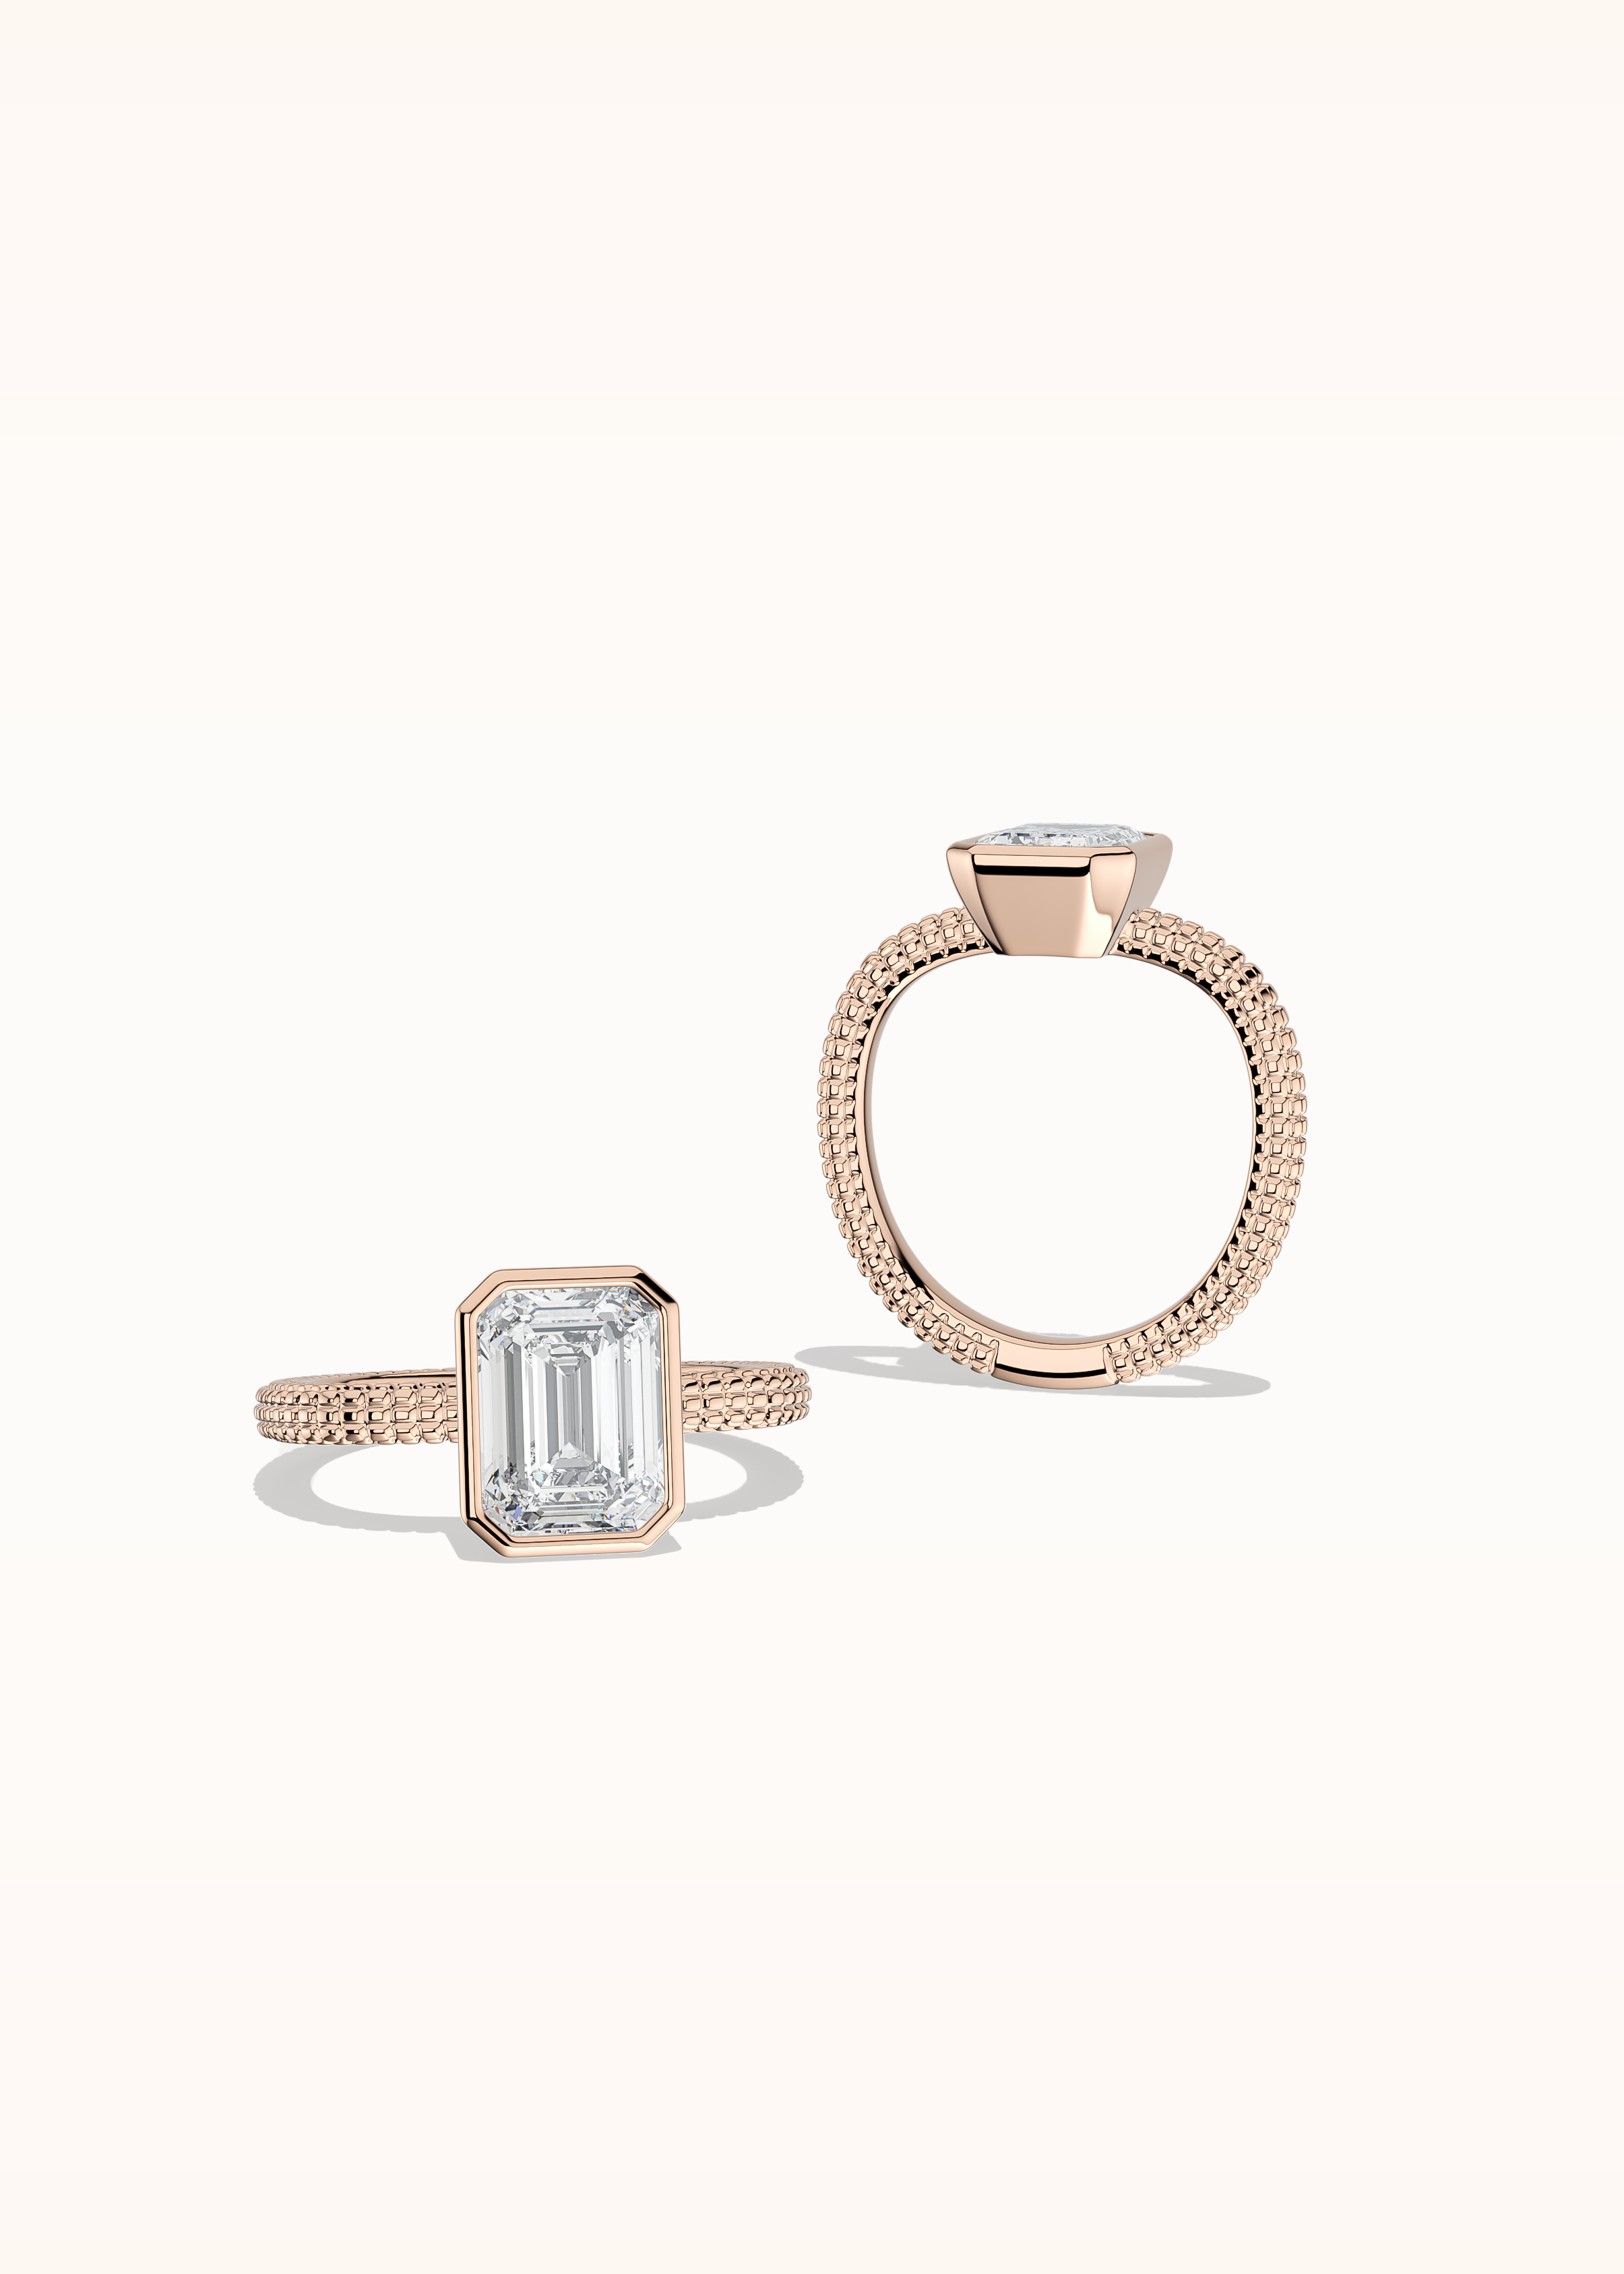 Ethereal Solitaire Radiant Diamond Ring